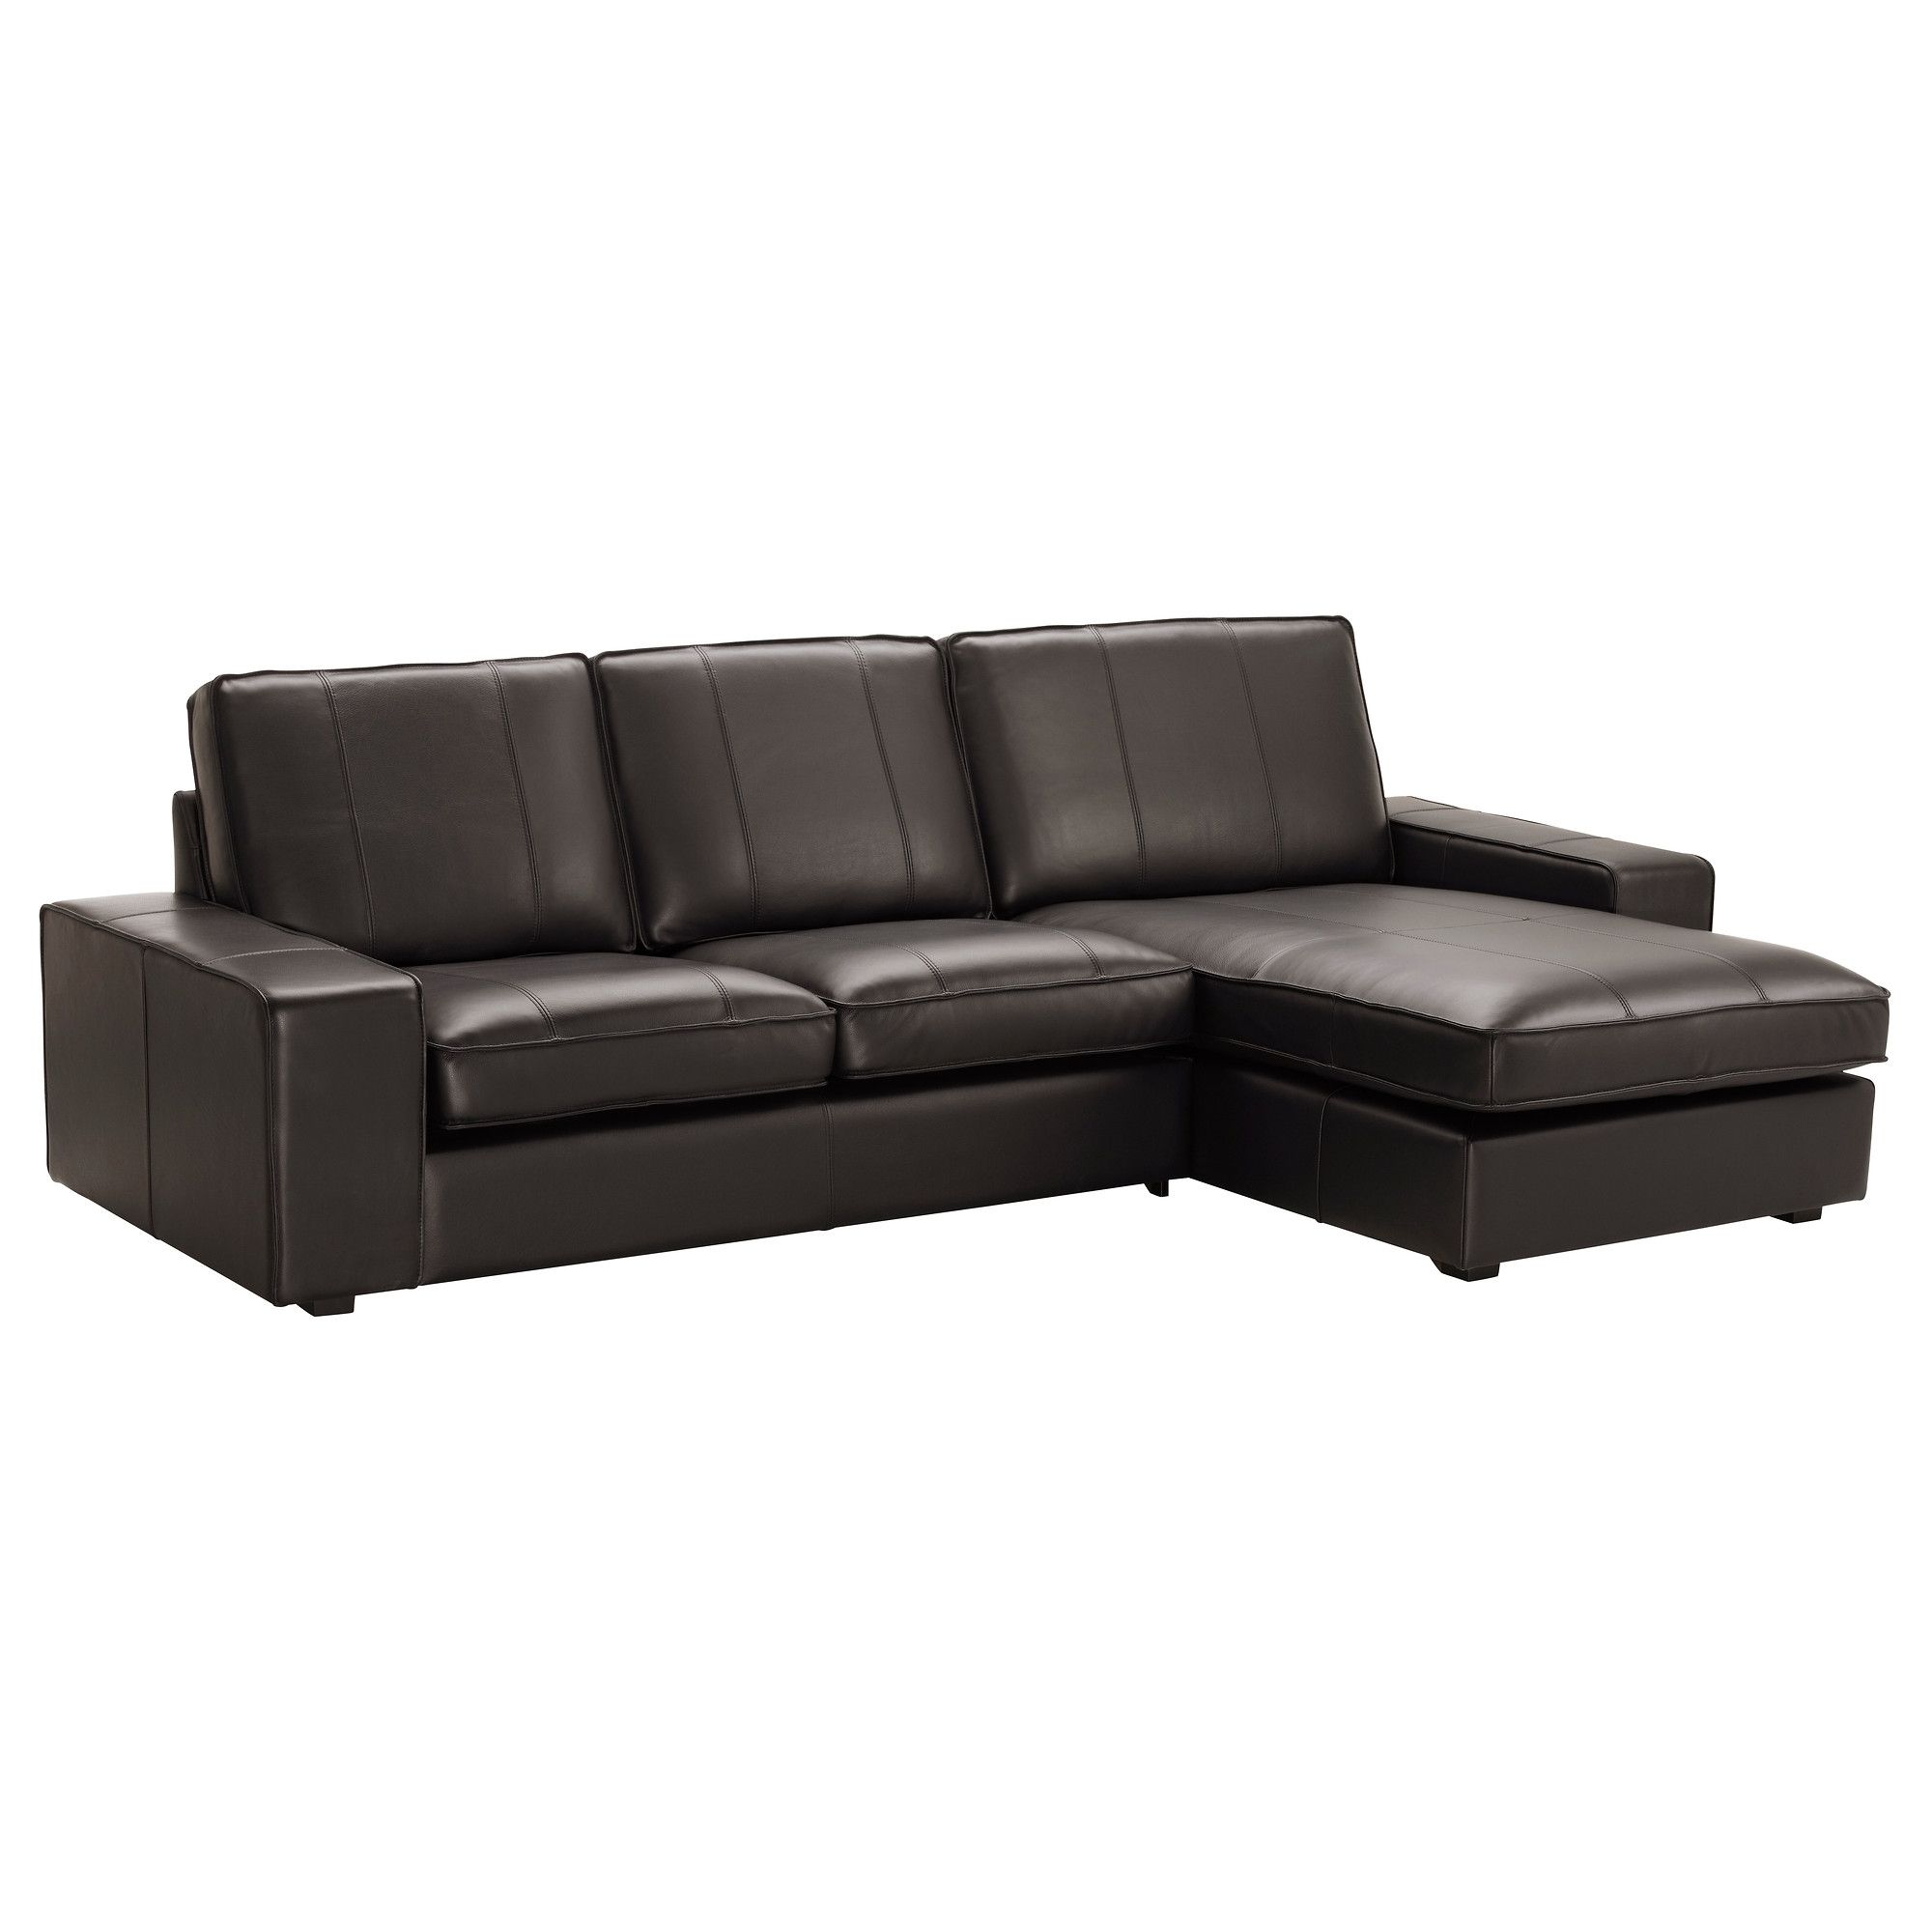 Most Recent Ikea Chaise Sofas Throughout Kivik Sofa – With Chaise/grann/bomstad Black – Ikea (View 5 of 15)